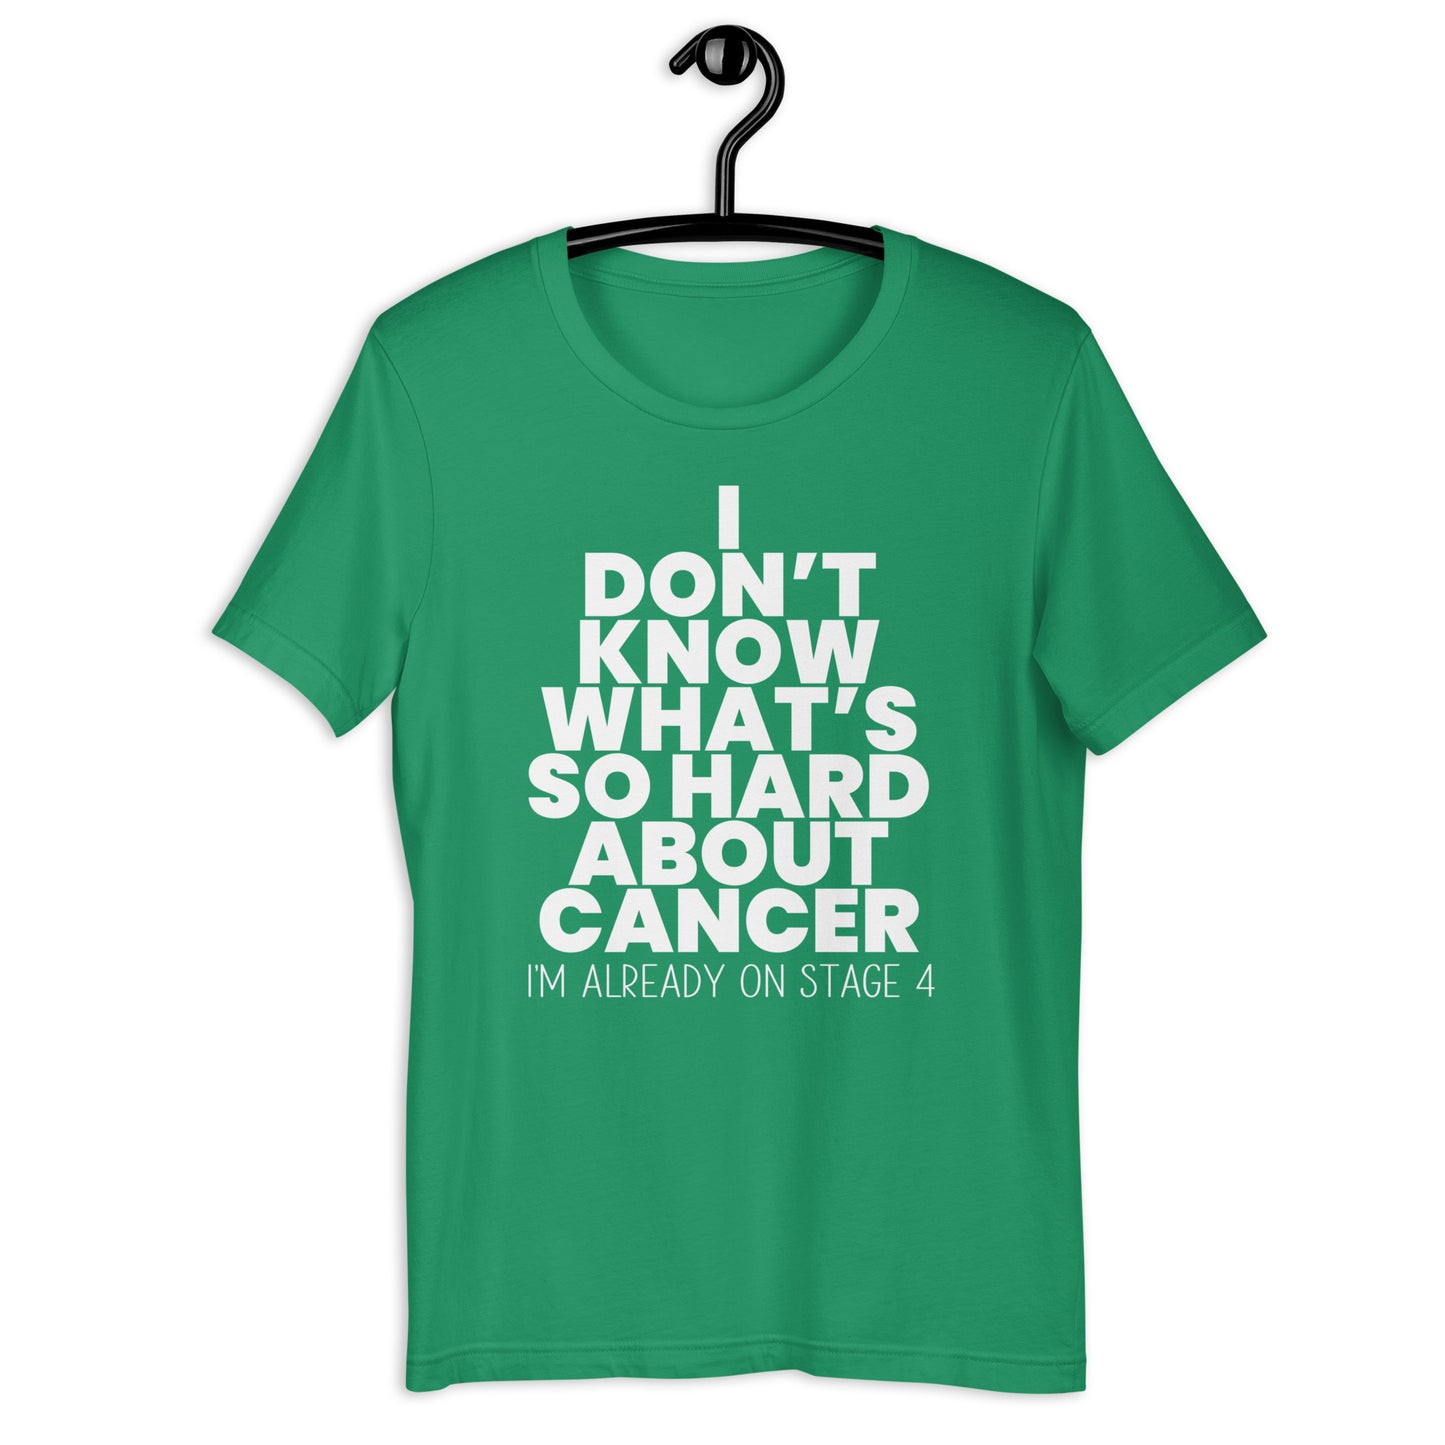 What's So Hard About Cancer? Tee